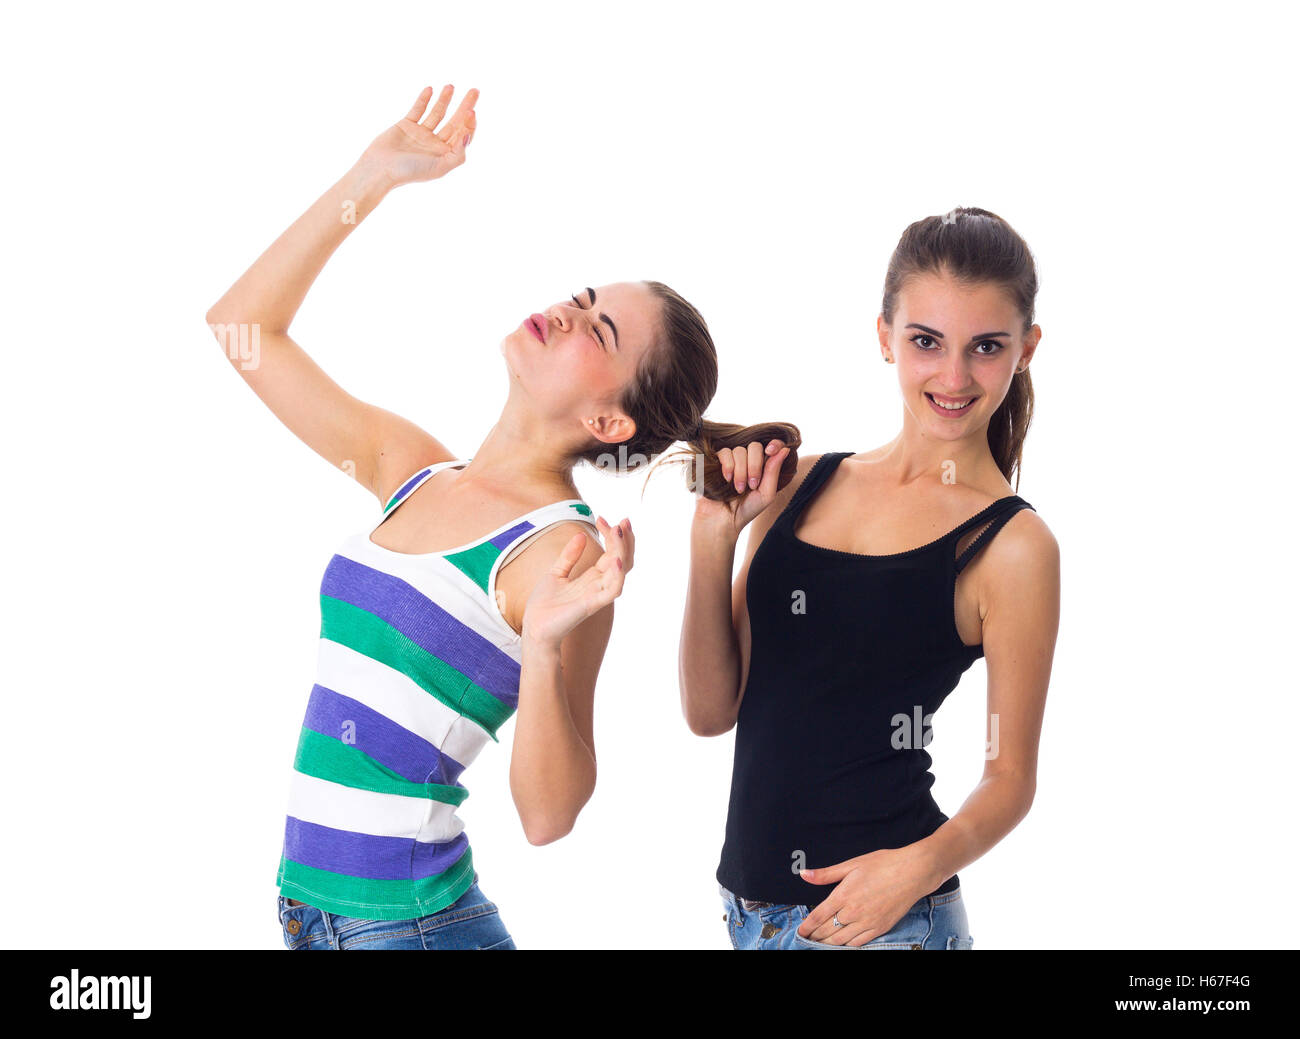 Young woman holding another woman's hair Stock Photo